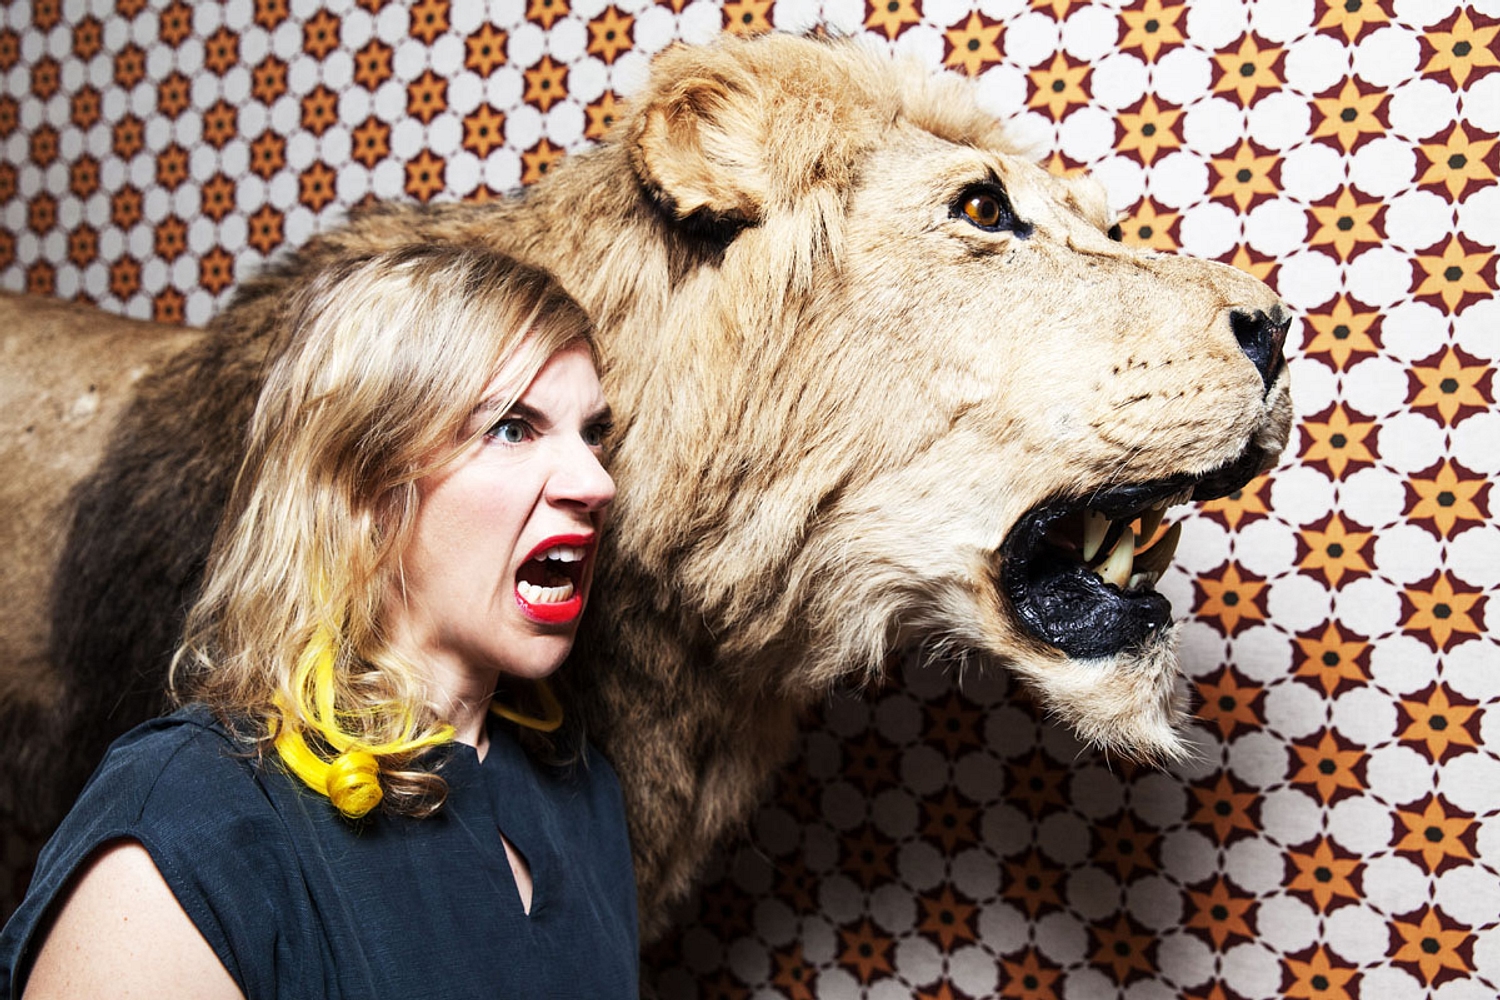 The DIY List 2014: Tune-Yards forges her own path